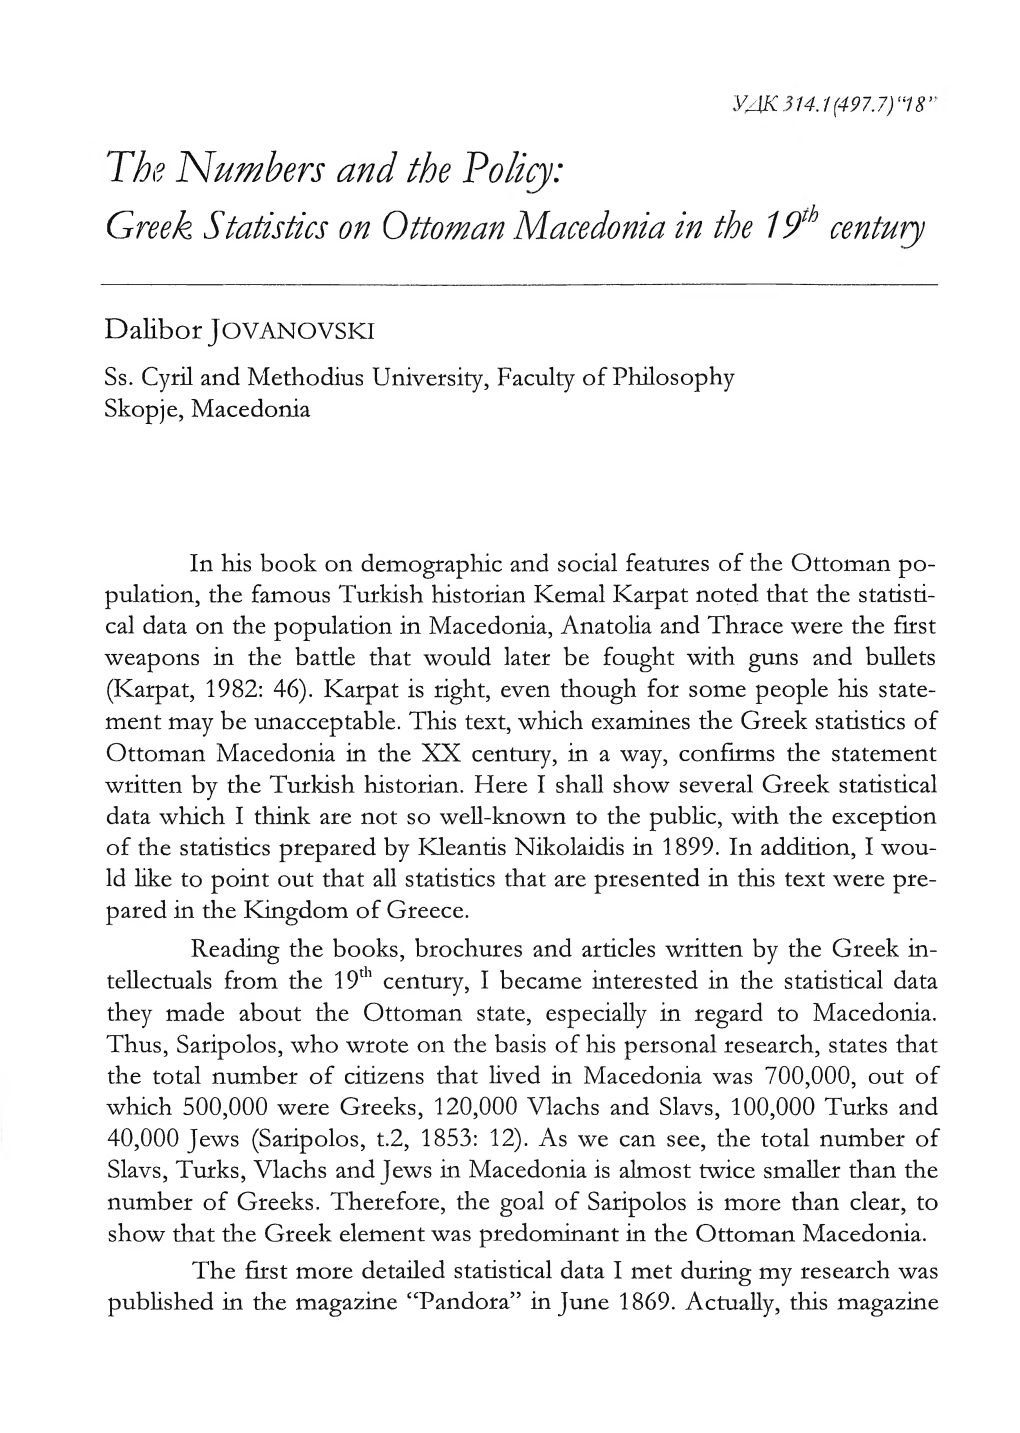 The Numbers and the Policy: Greek Statistics on Ottoman Macedonia in the 19Th Century